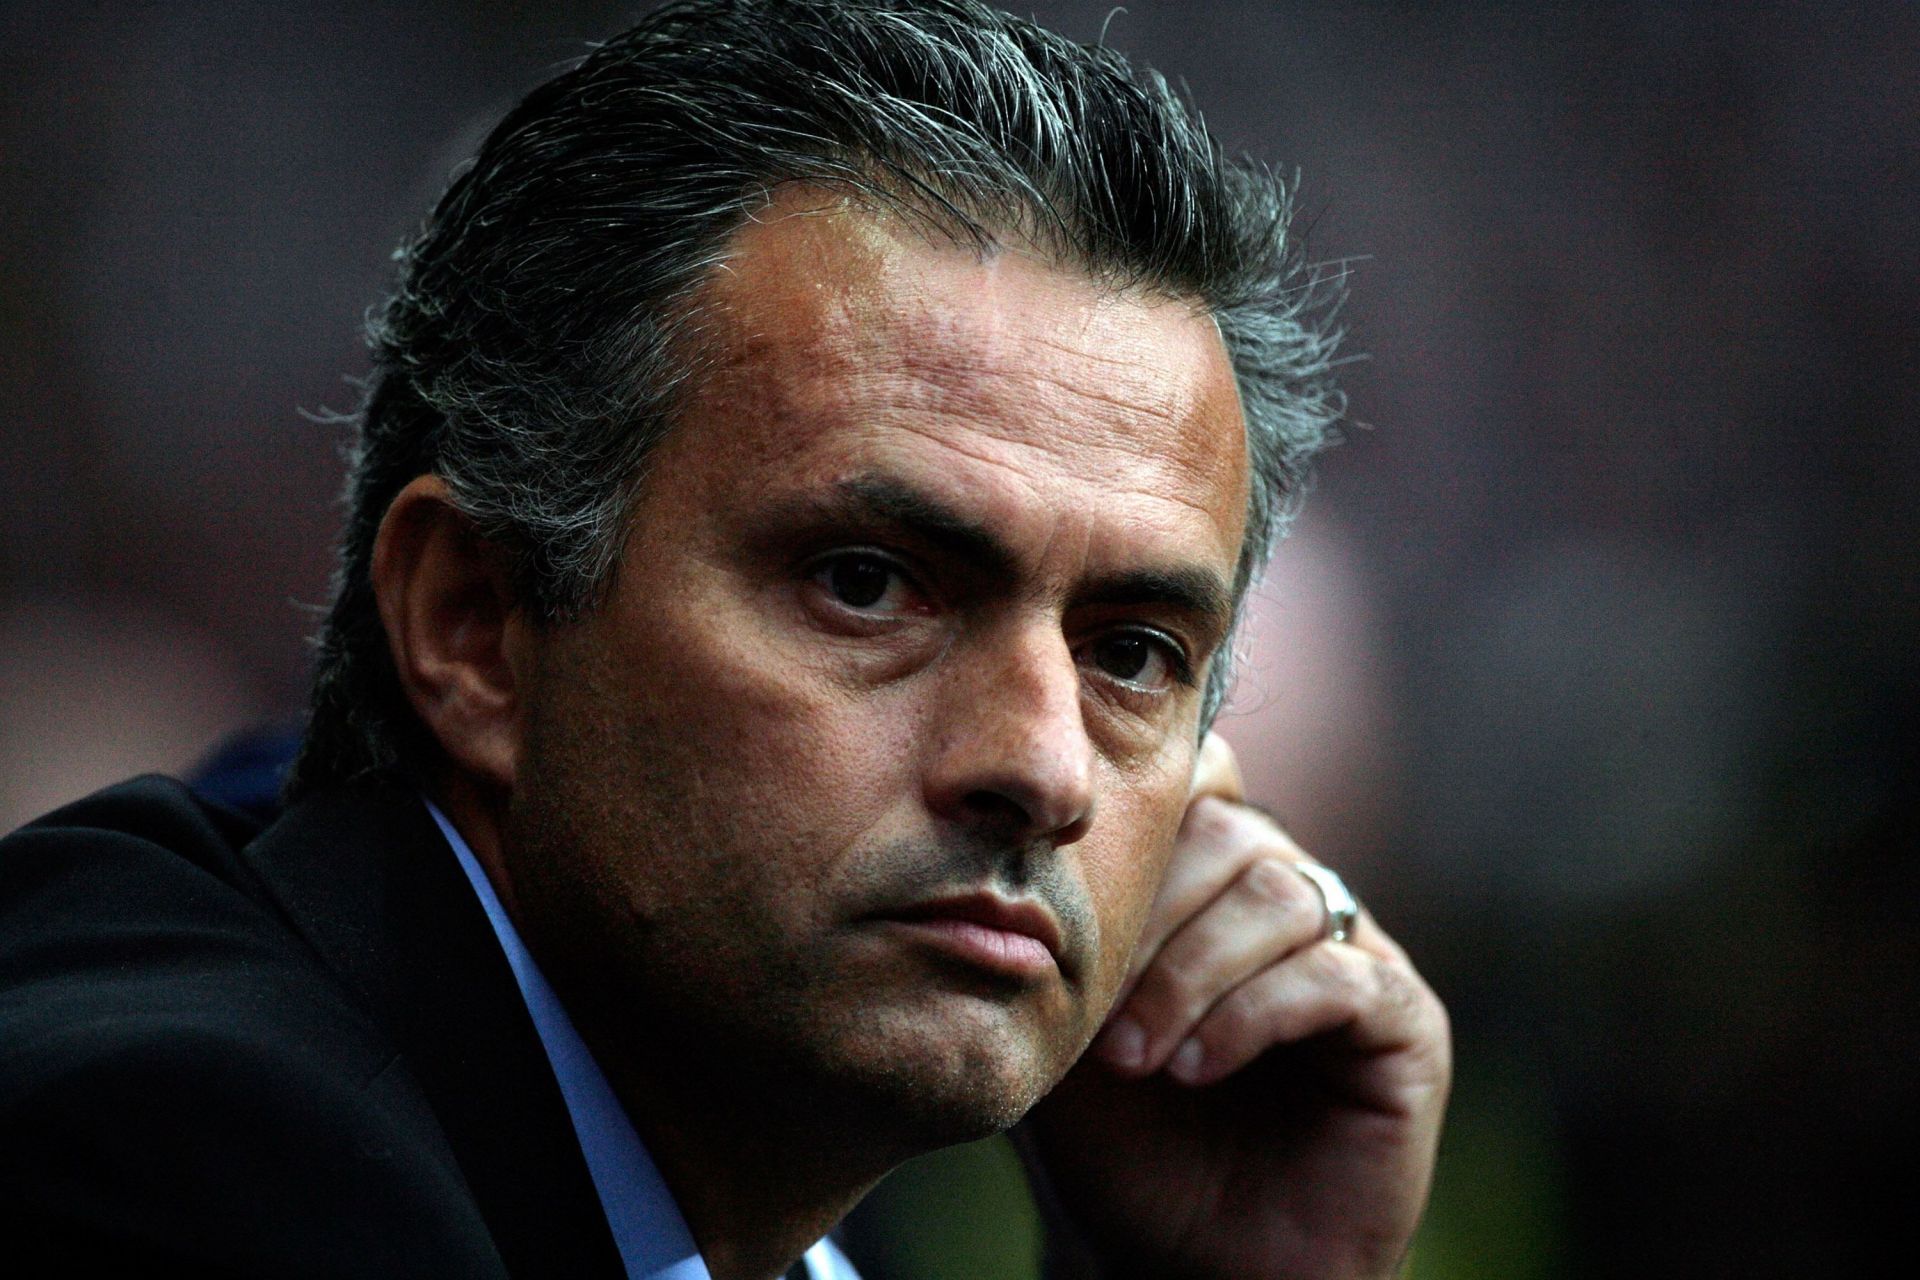 Jose Mourinho is one of the longest tenured managers at Chelsea in the last two decades.